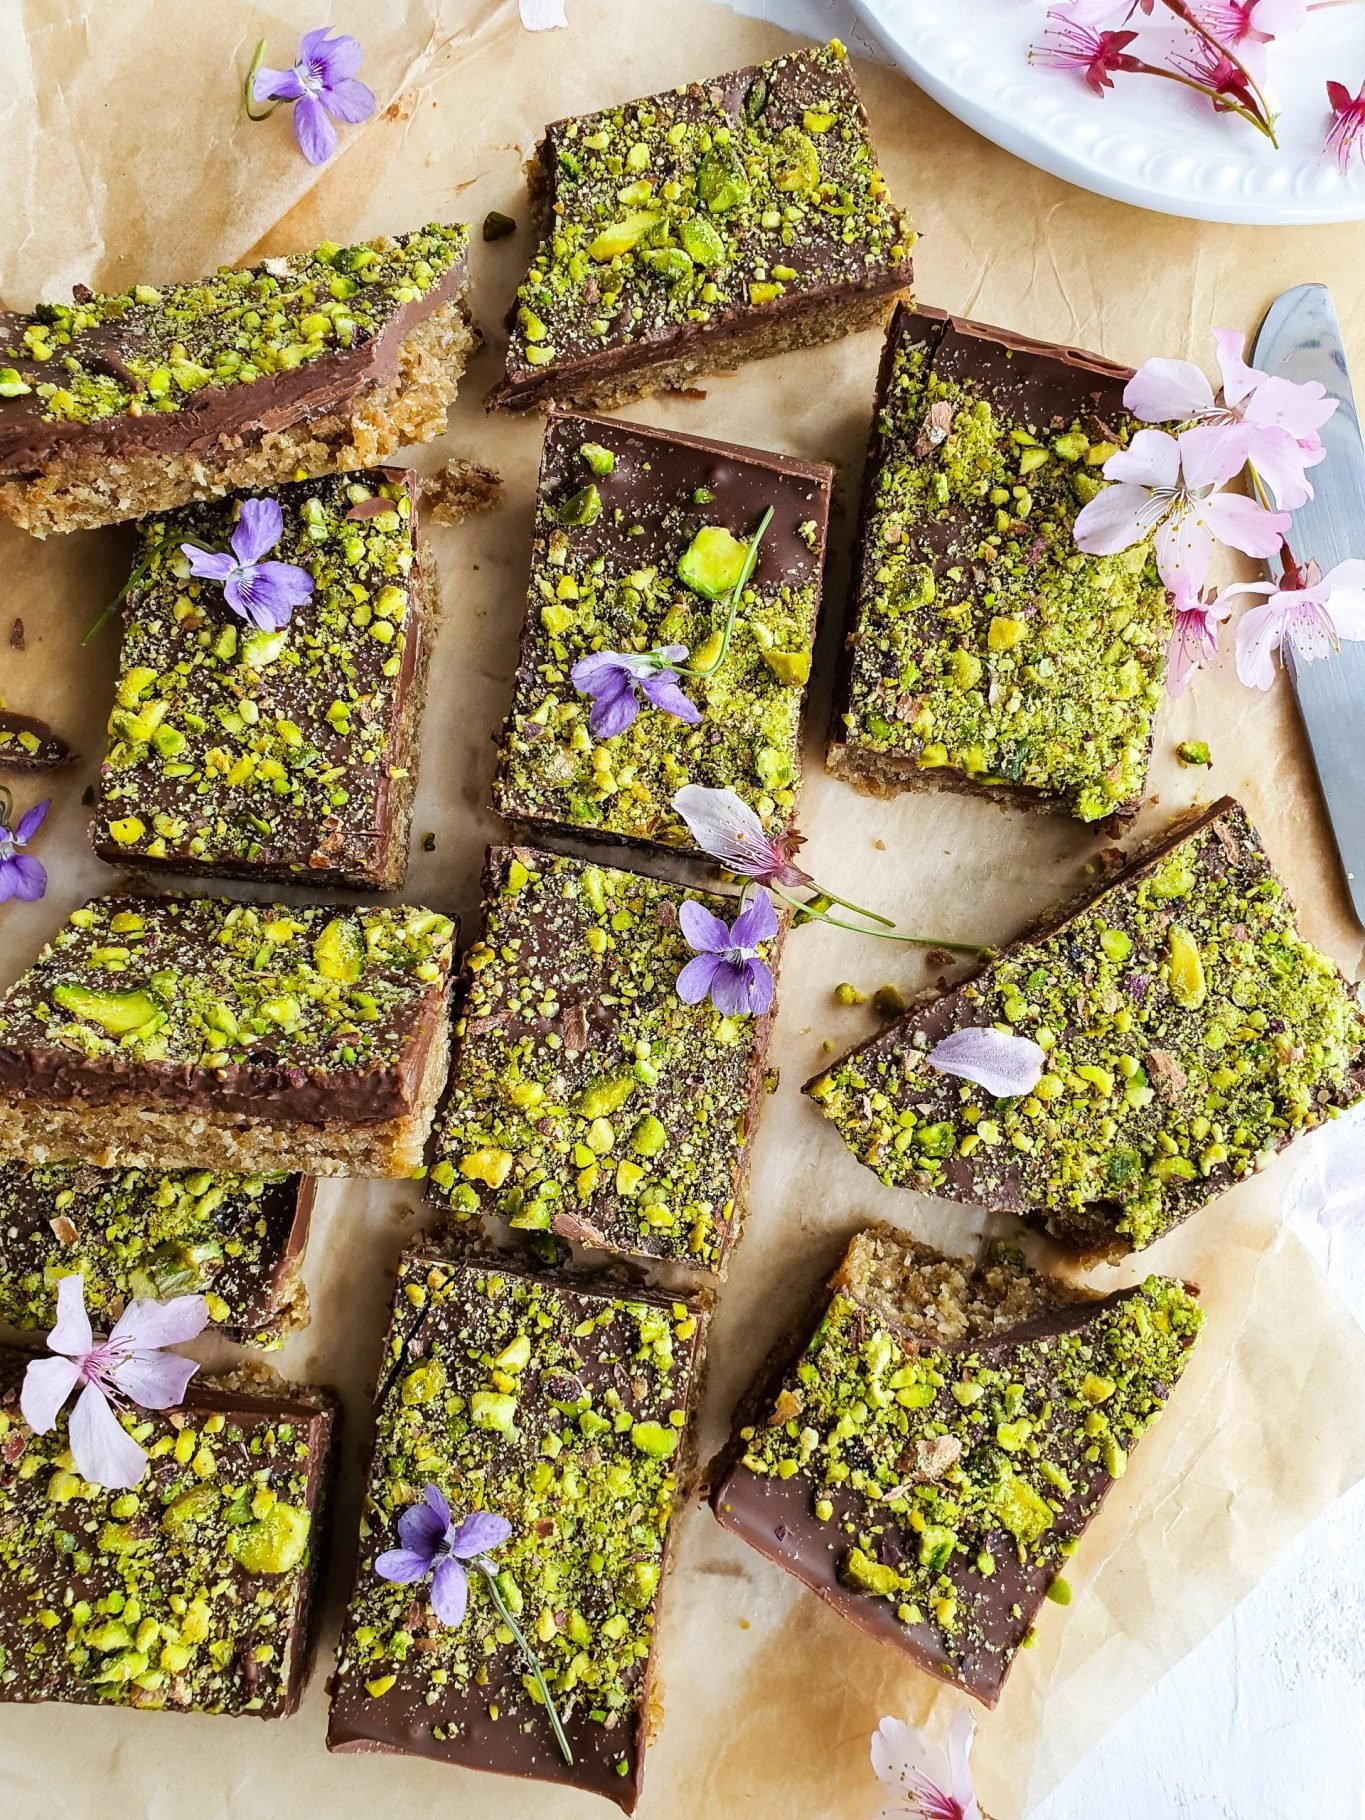 Satisfy your sweet tooth with these easy-to-make 4 ingredient Tahini Pistachio Date Bars. Made with just four ingredients and packed with flavor, these bars are a healthy treat you can feel good about eating.